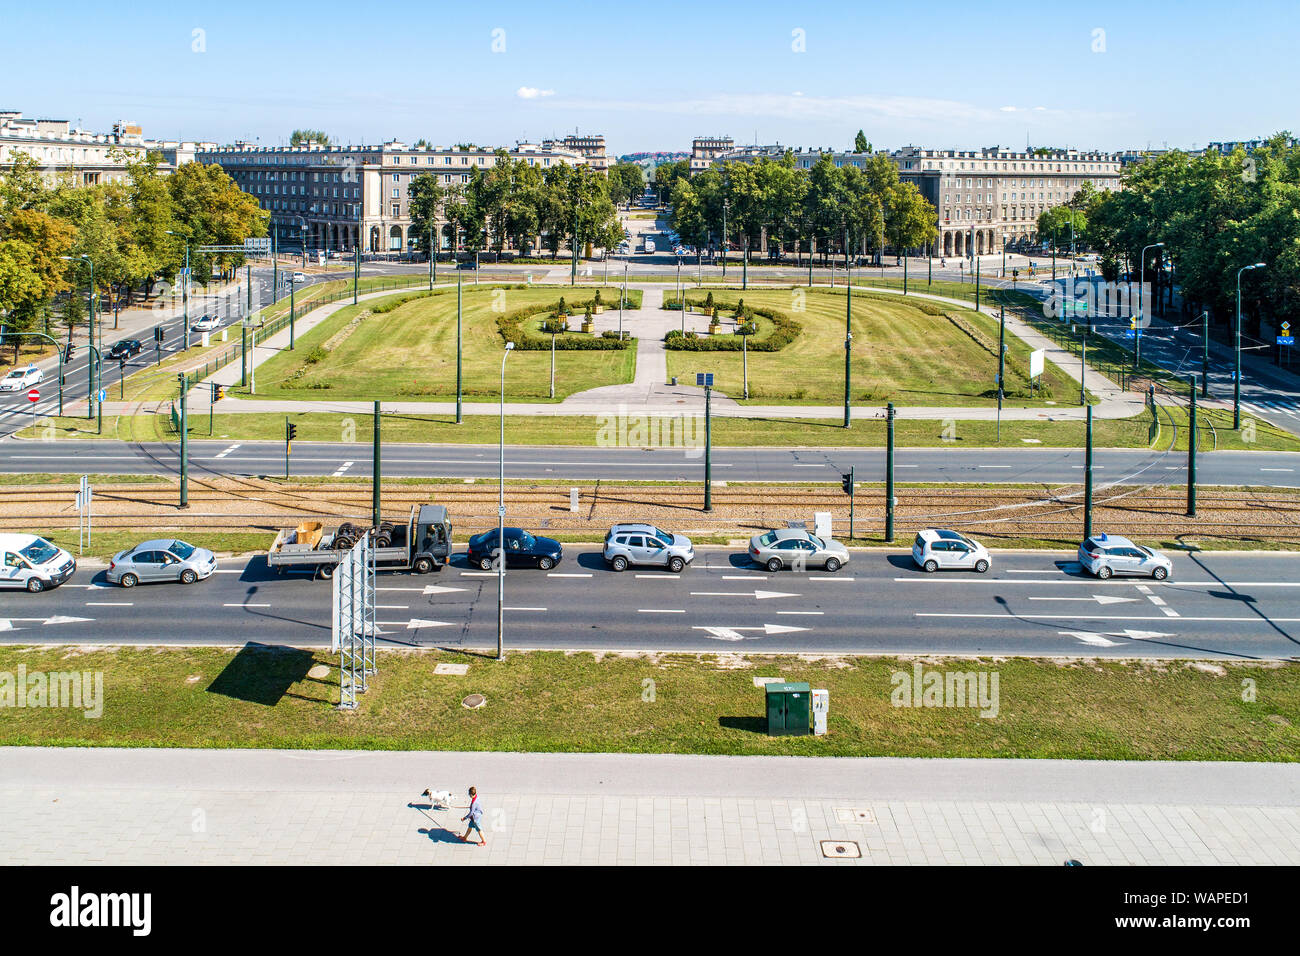 Kraków, Poland.  Aerial panorama of Ronald Reagan Central Square in Nowa Huta. One of two entirely planned and build socialist realist towns in the wo Stock Photo